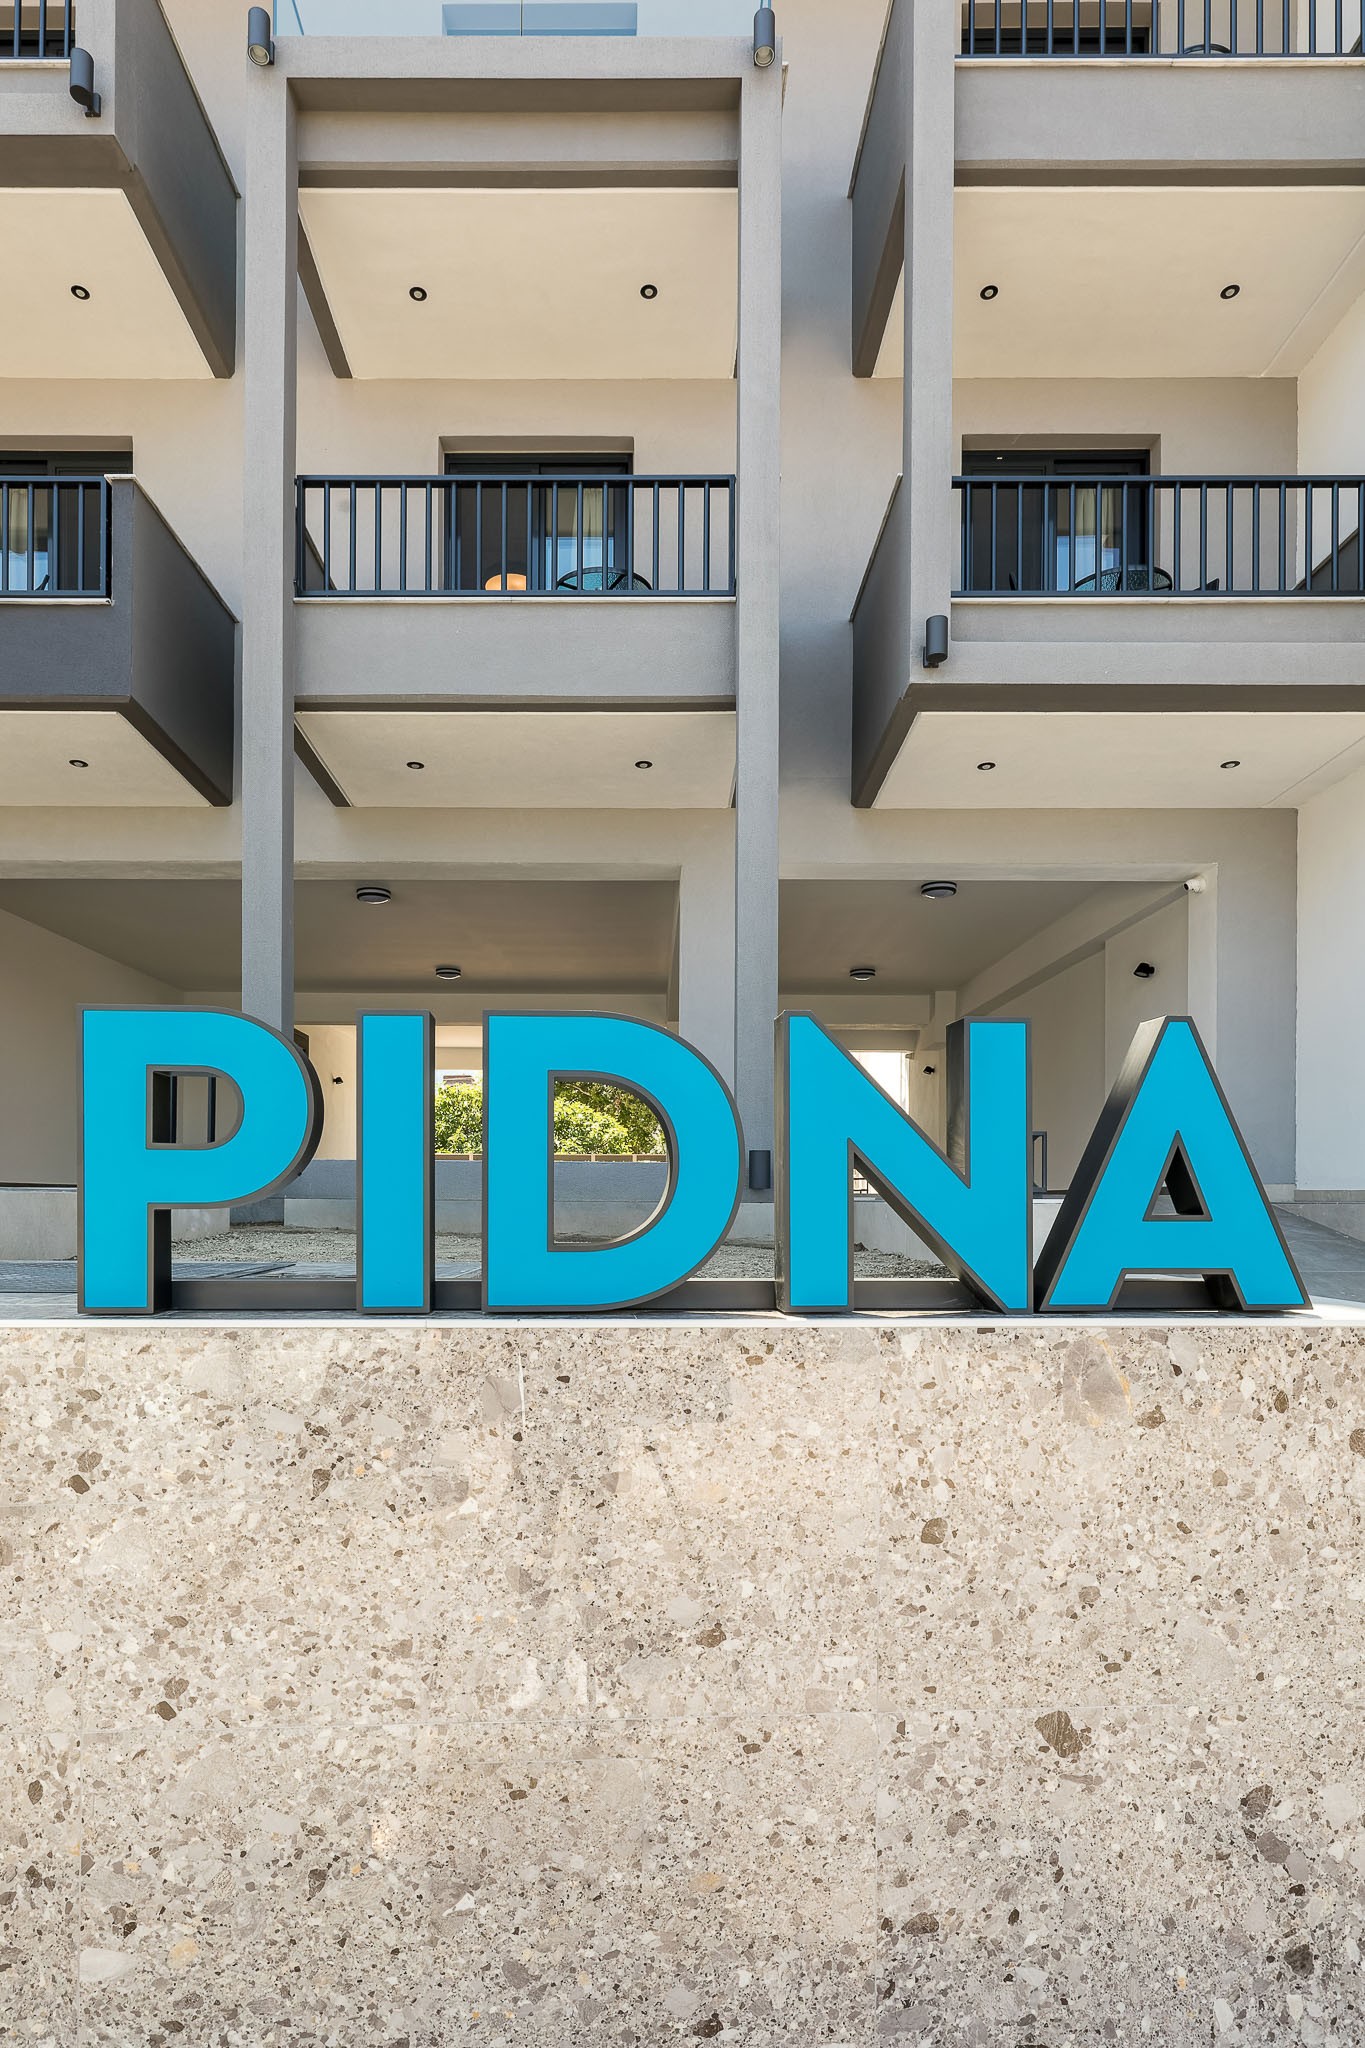 Pidna Hotel